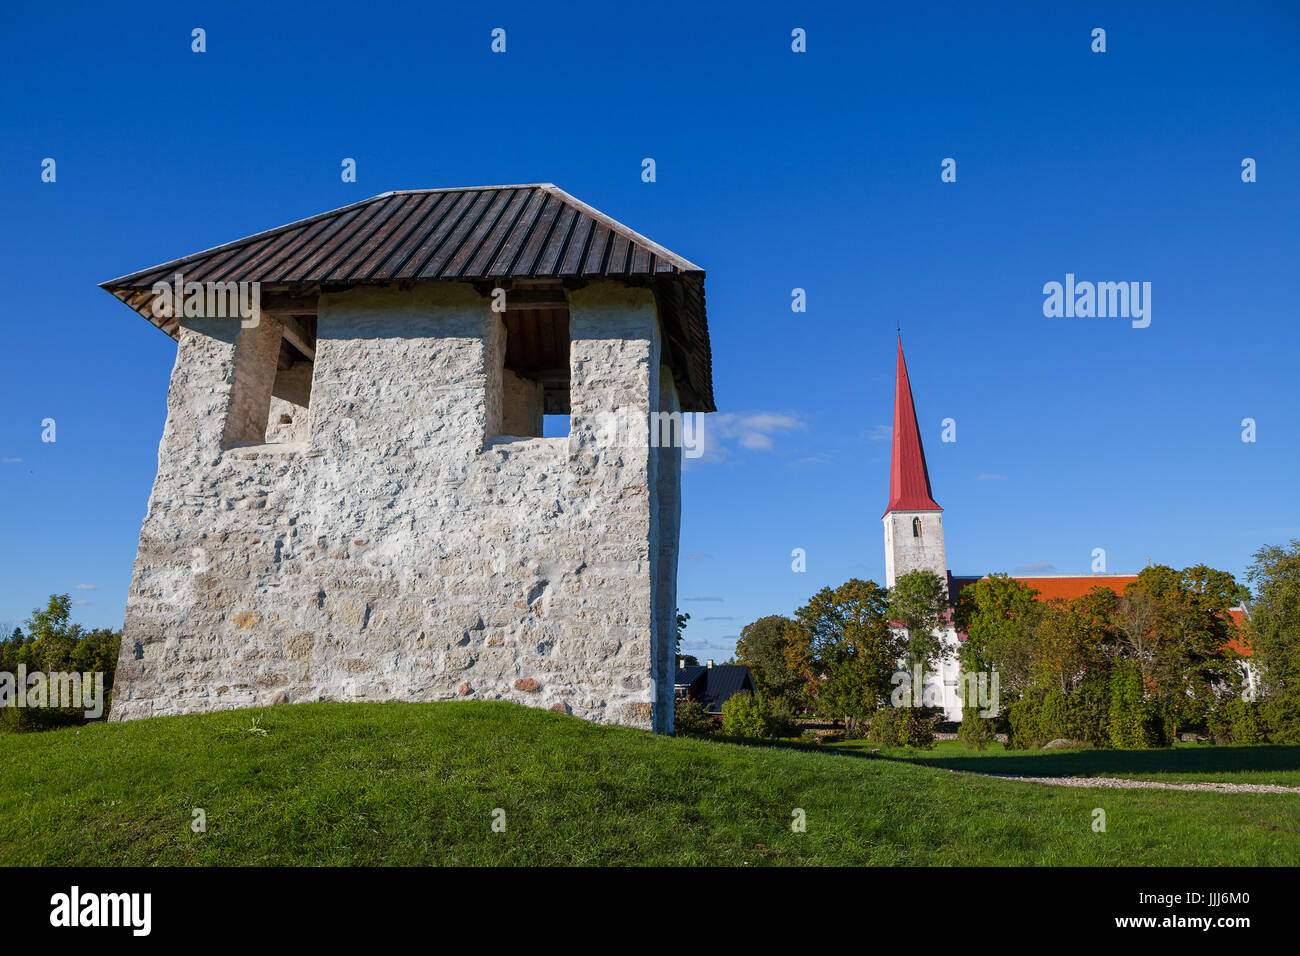 Ancient Lutheran church and bellfry in Kihelkonna, Saaremaa, Estonia. Early autumn sunny day. Landscape view. Stock Photo